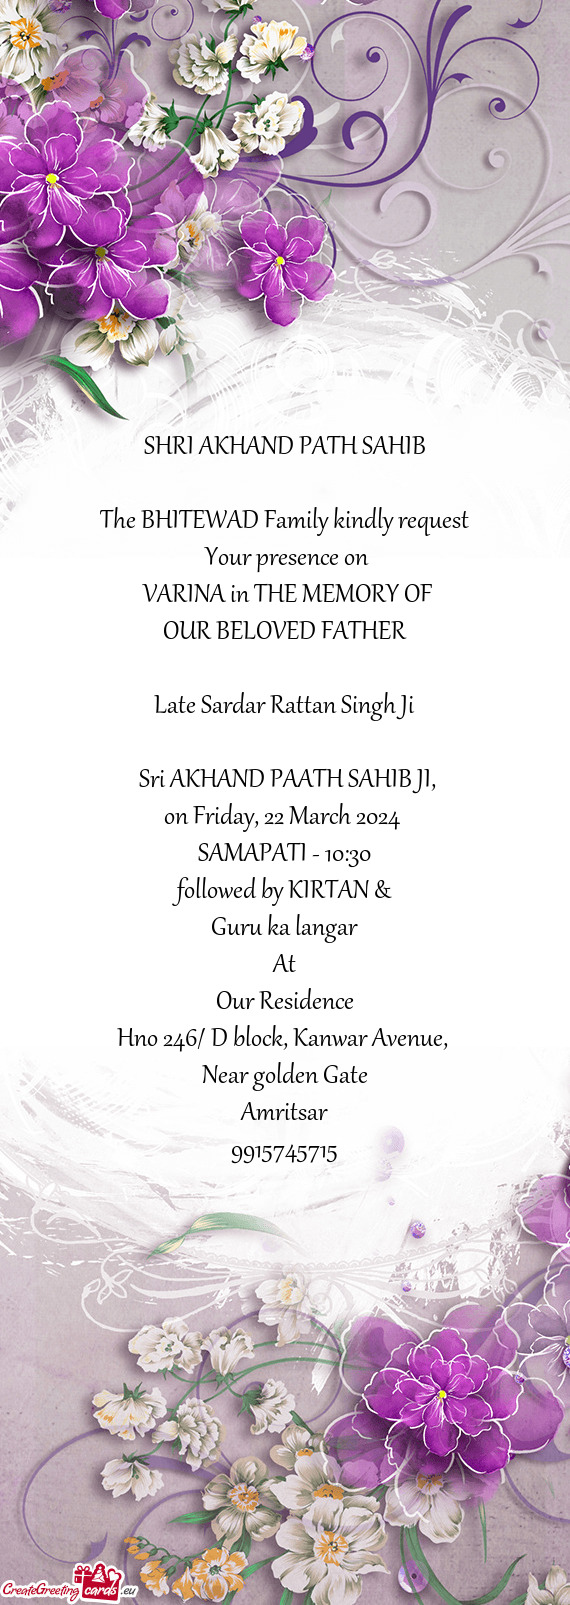 The BHITEWAD Family kindly request